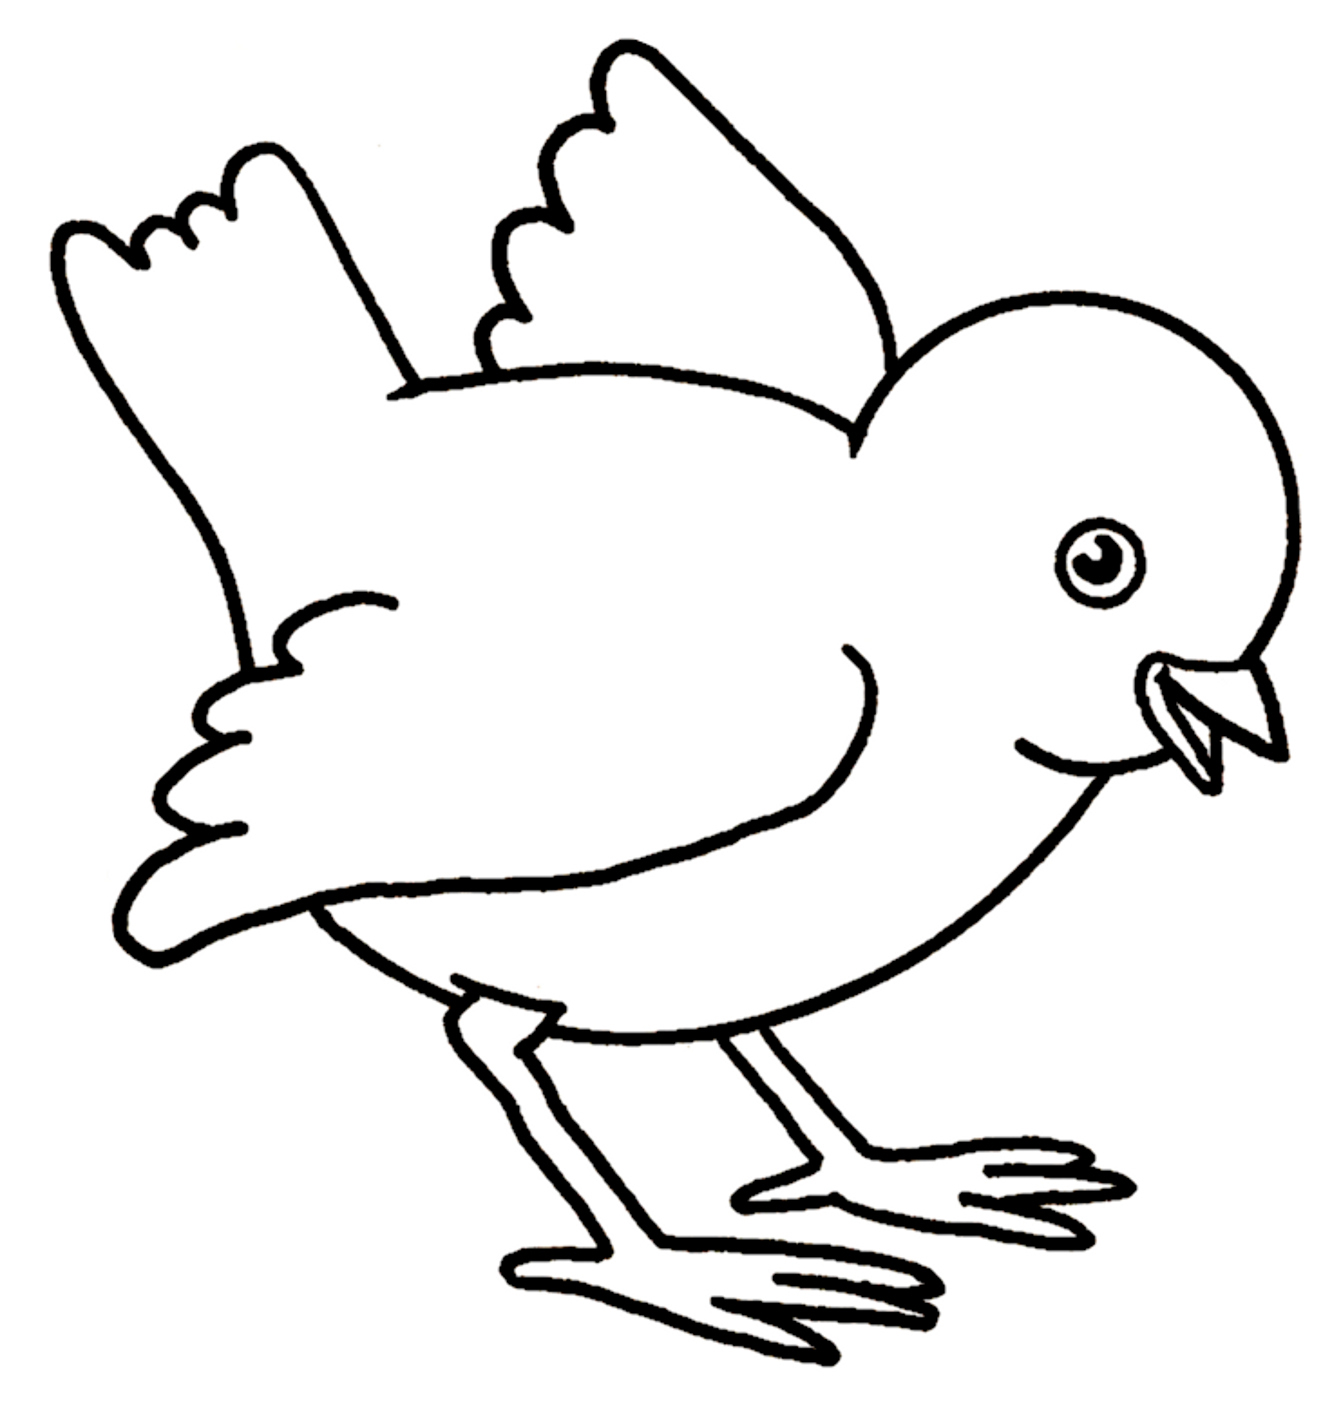 Baby chicken coloring pages - Coloring Pages & Pictures - IMAGIXS